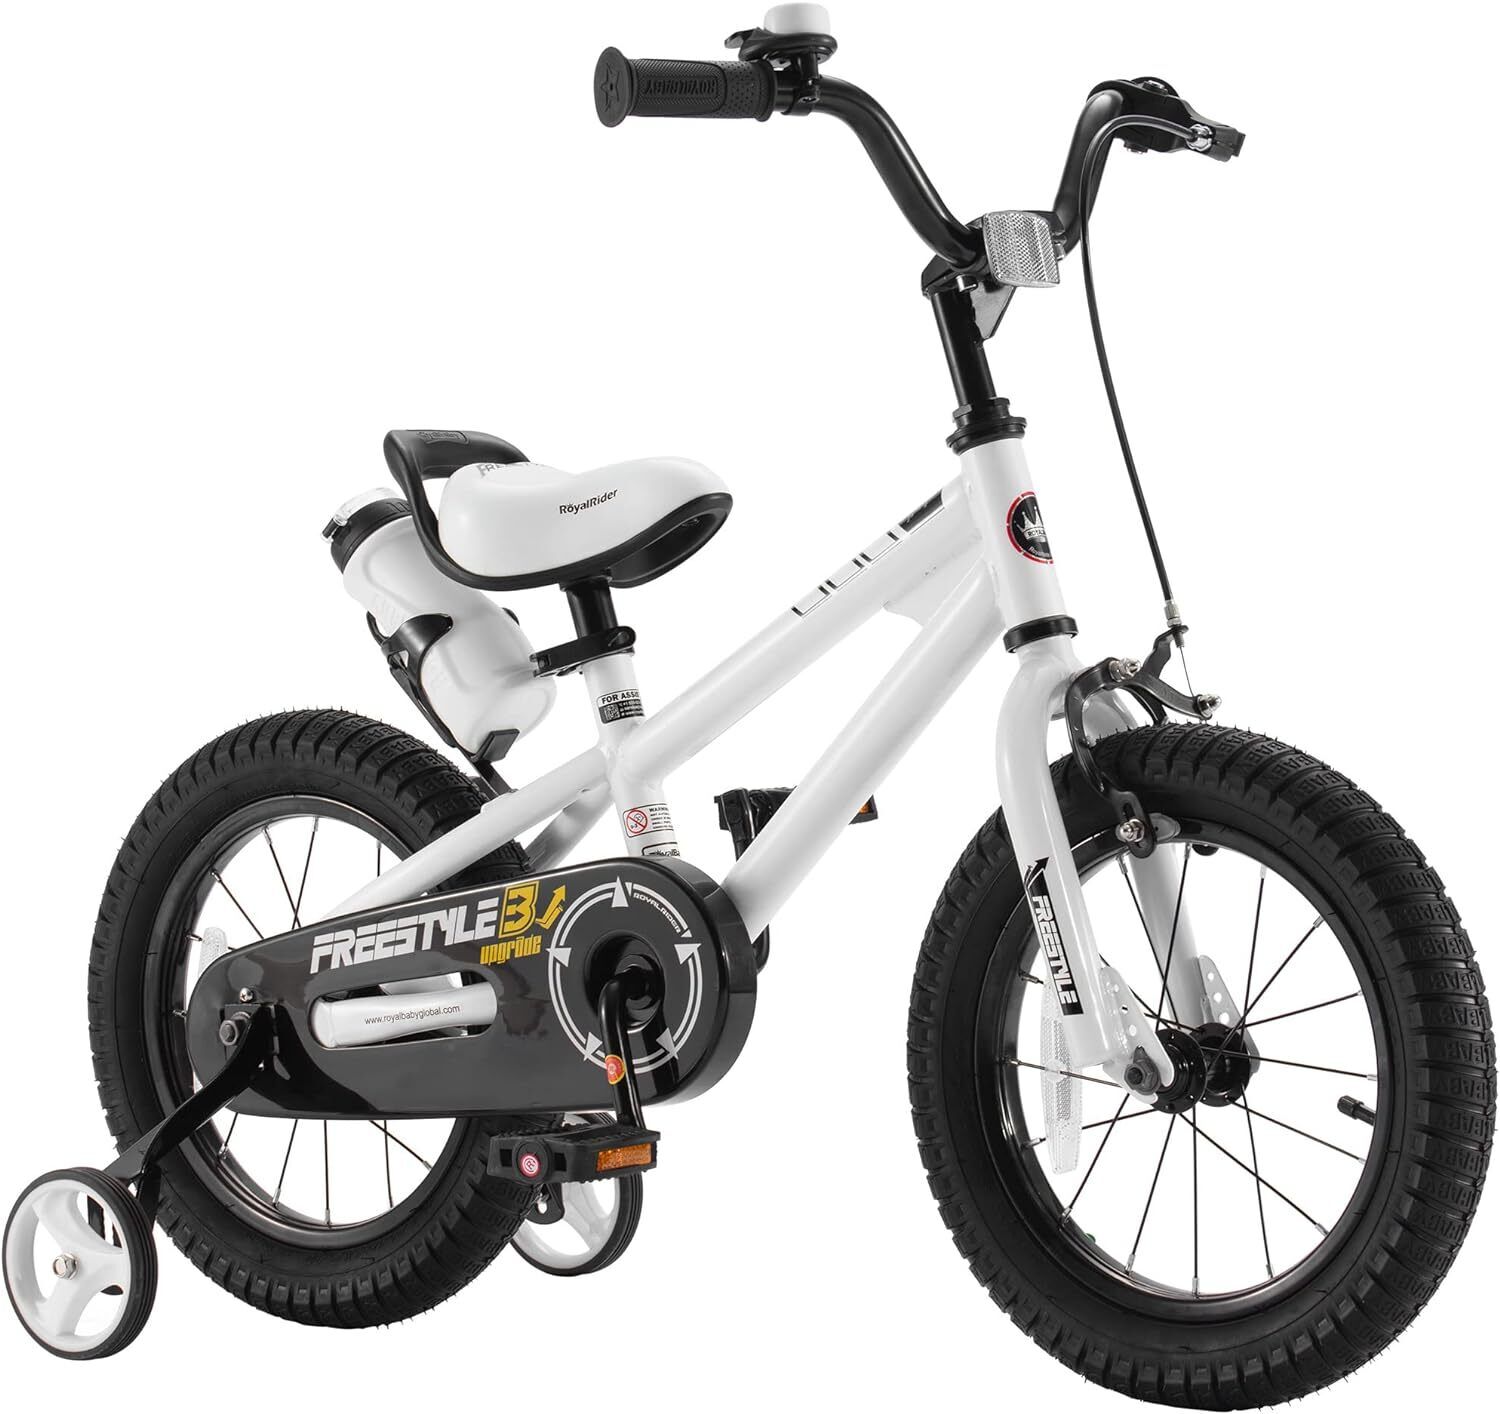 Freestyle Kids Bike 12 14 16 18 Inch Bicycle for Boys Girls Ages 3-10 Years